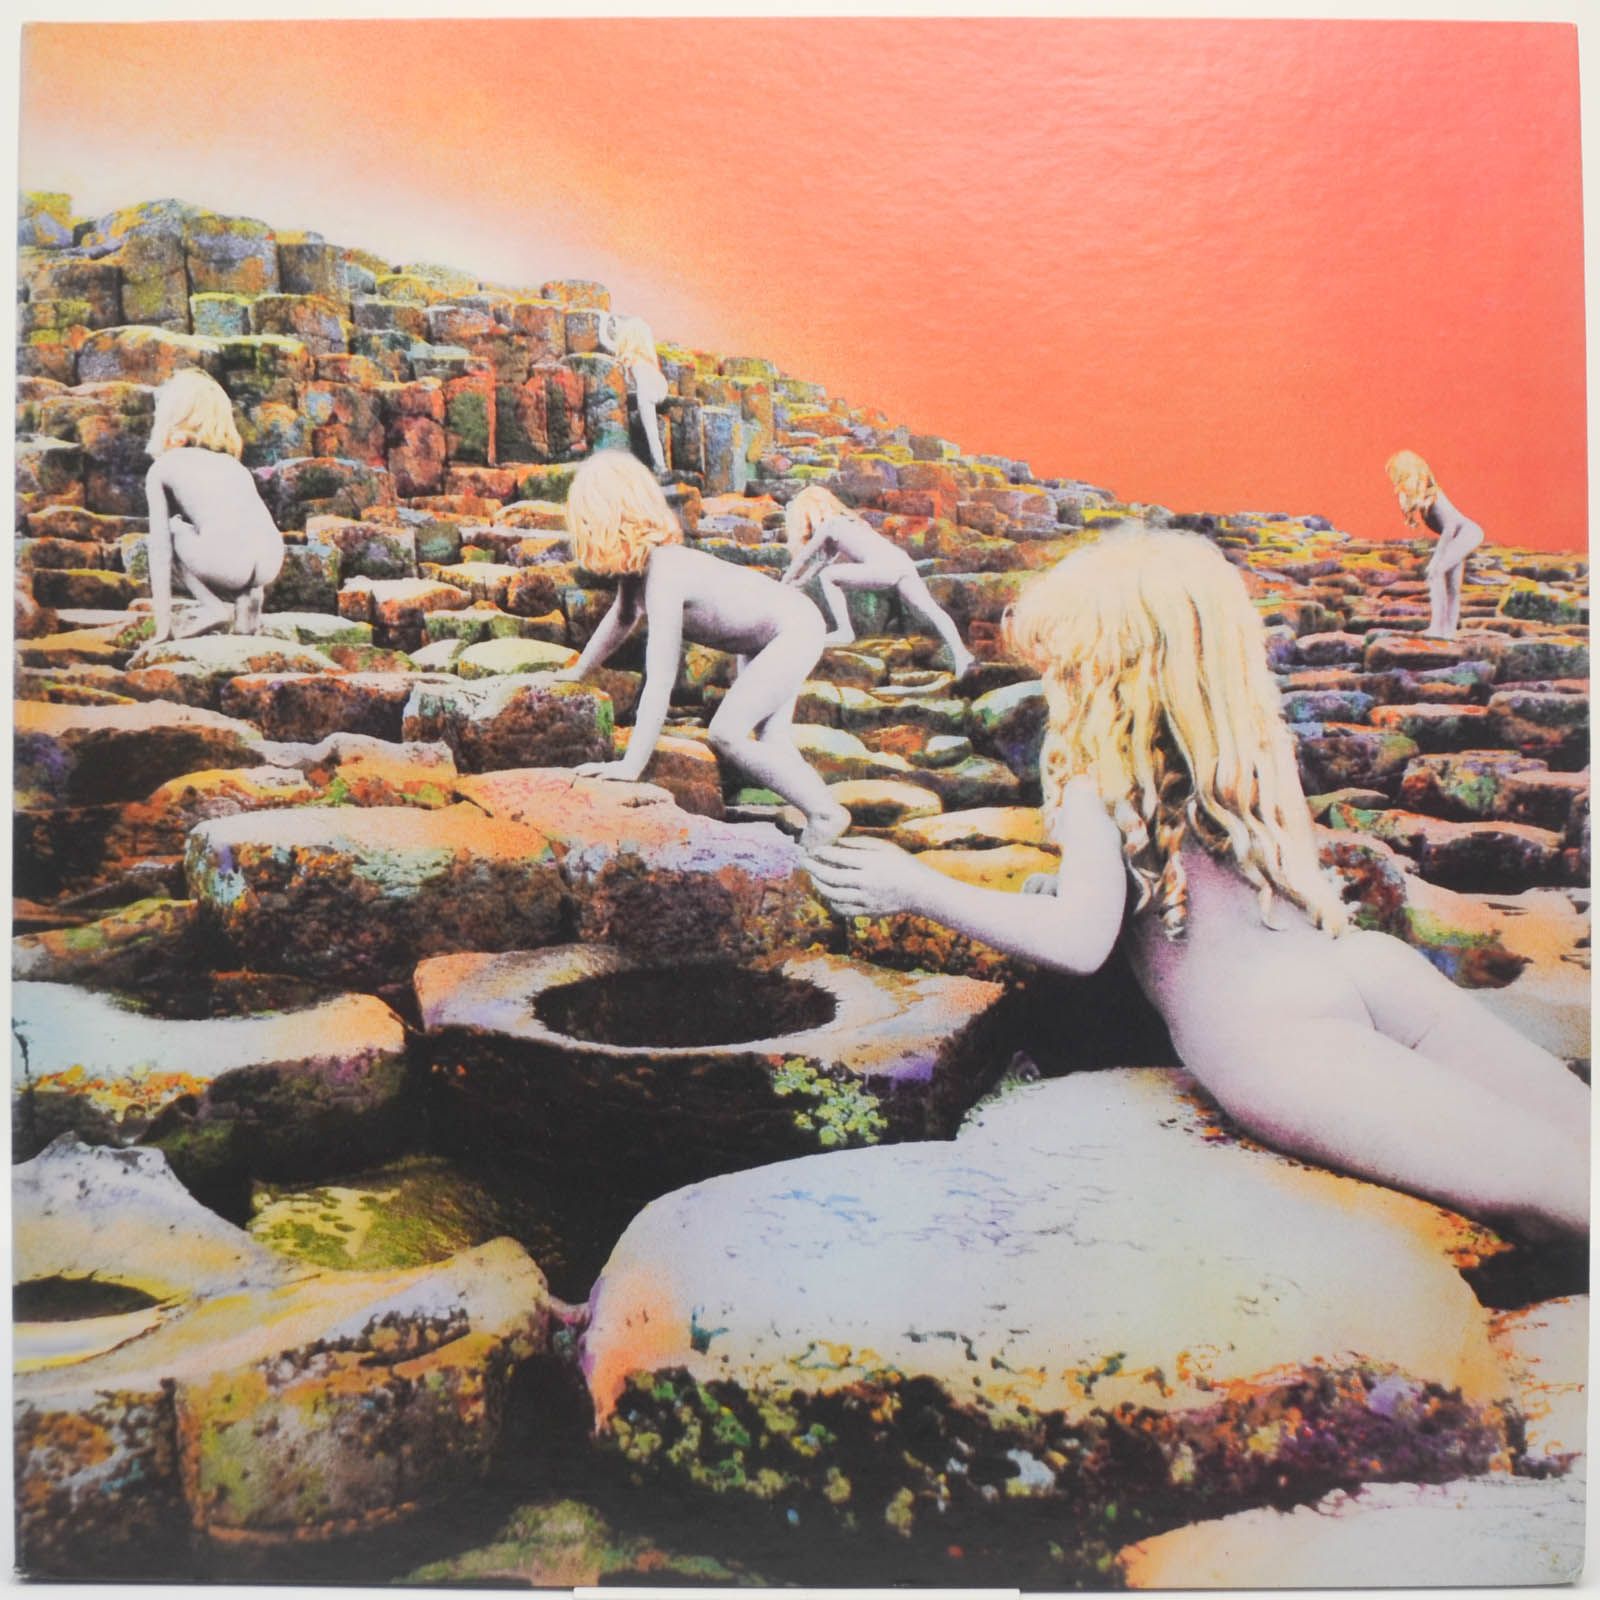 Led Zeppelin — Houses Of The Holy, 1973